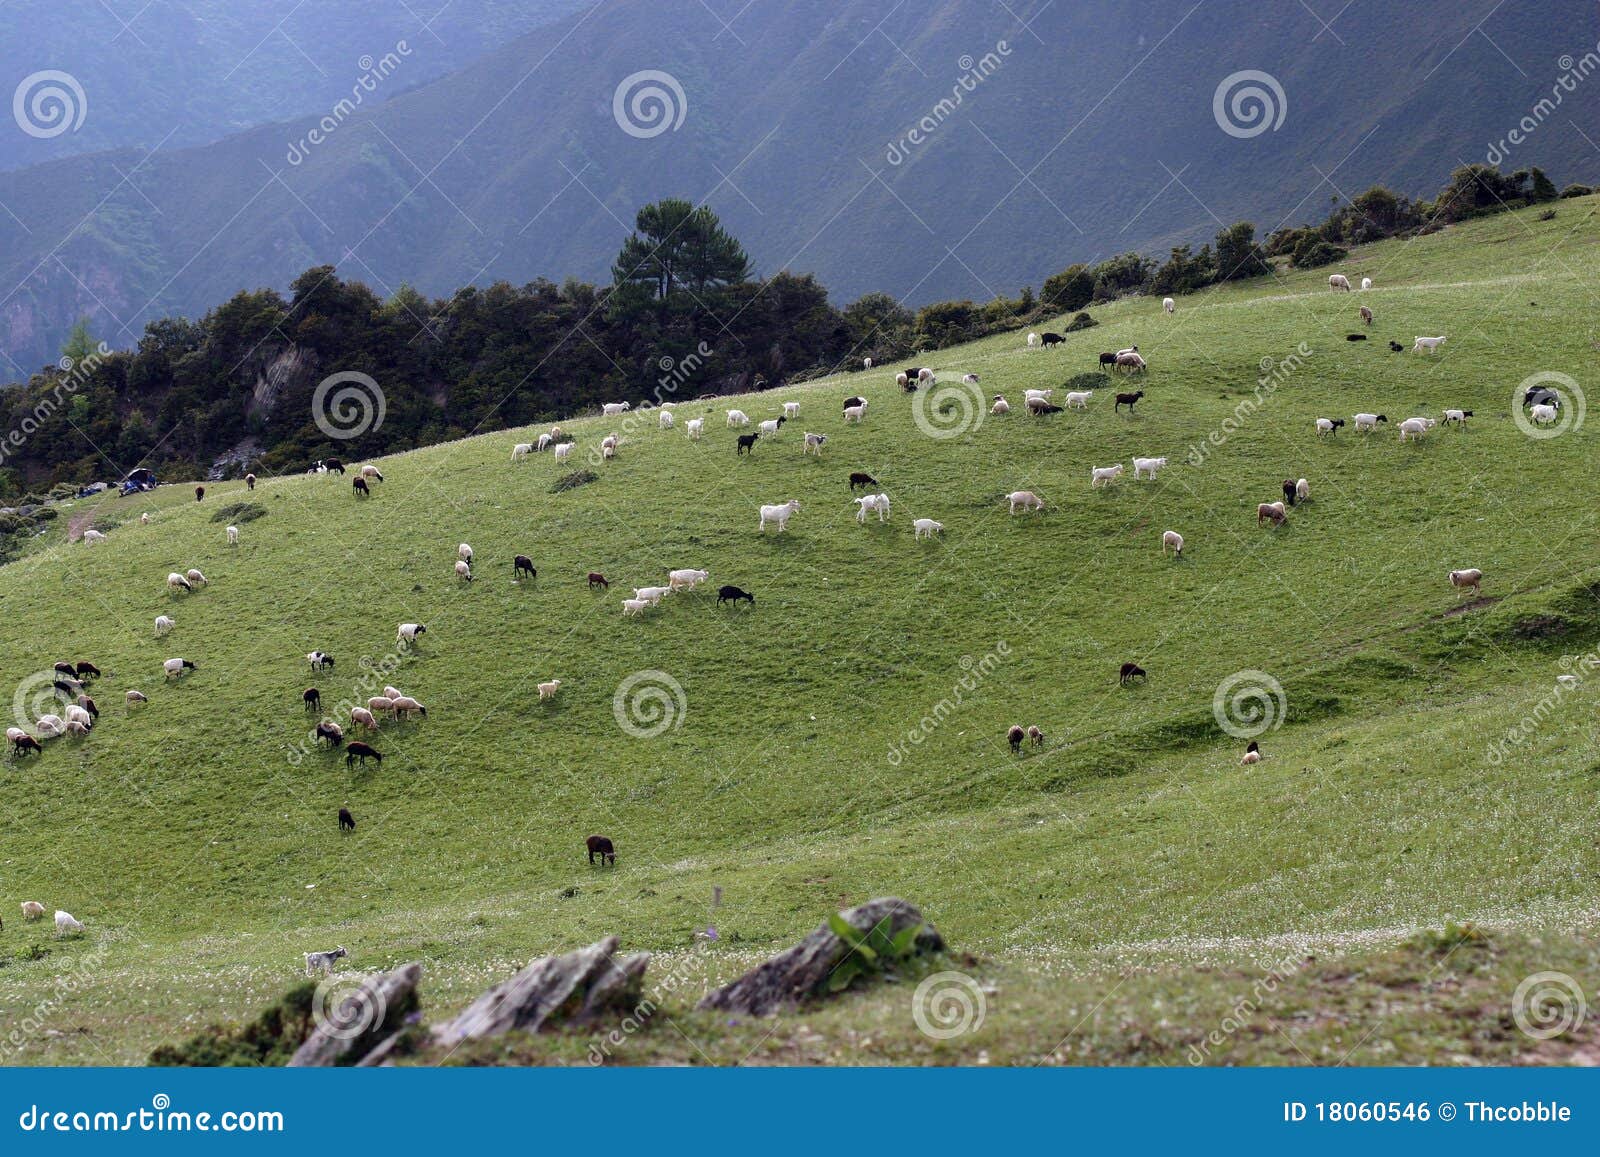 goats on the moutain grassland